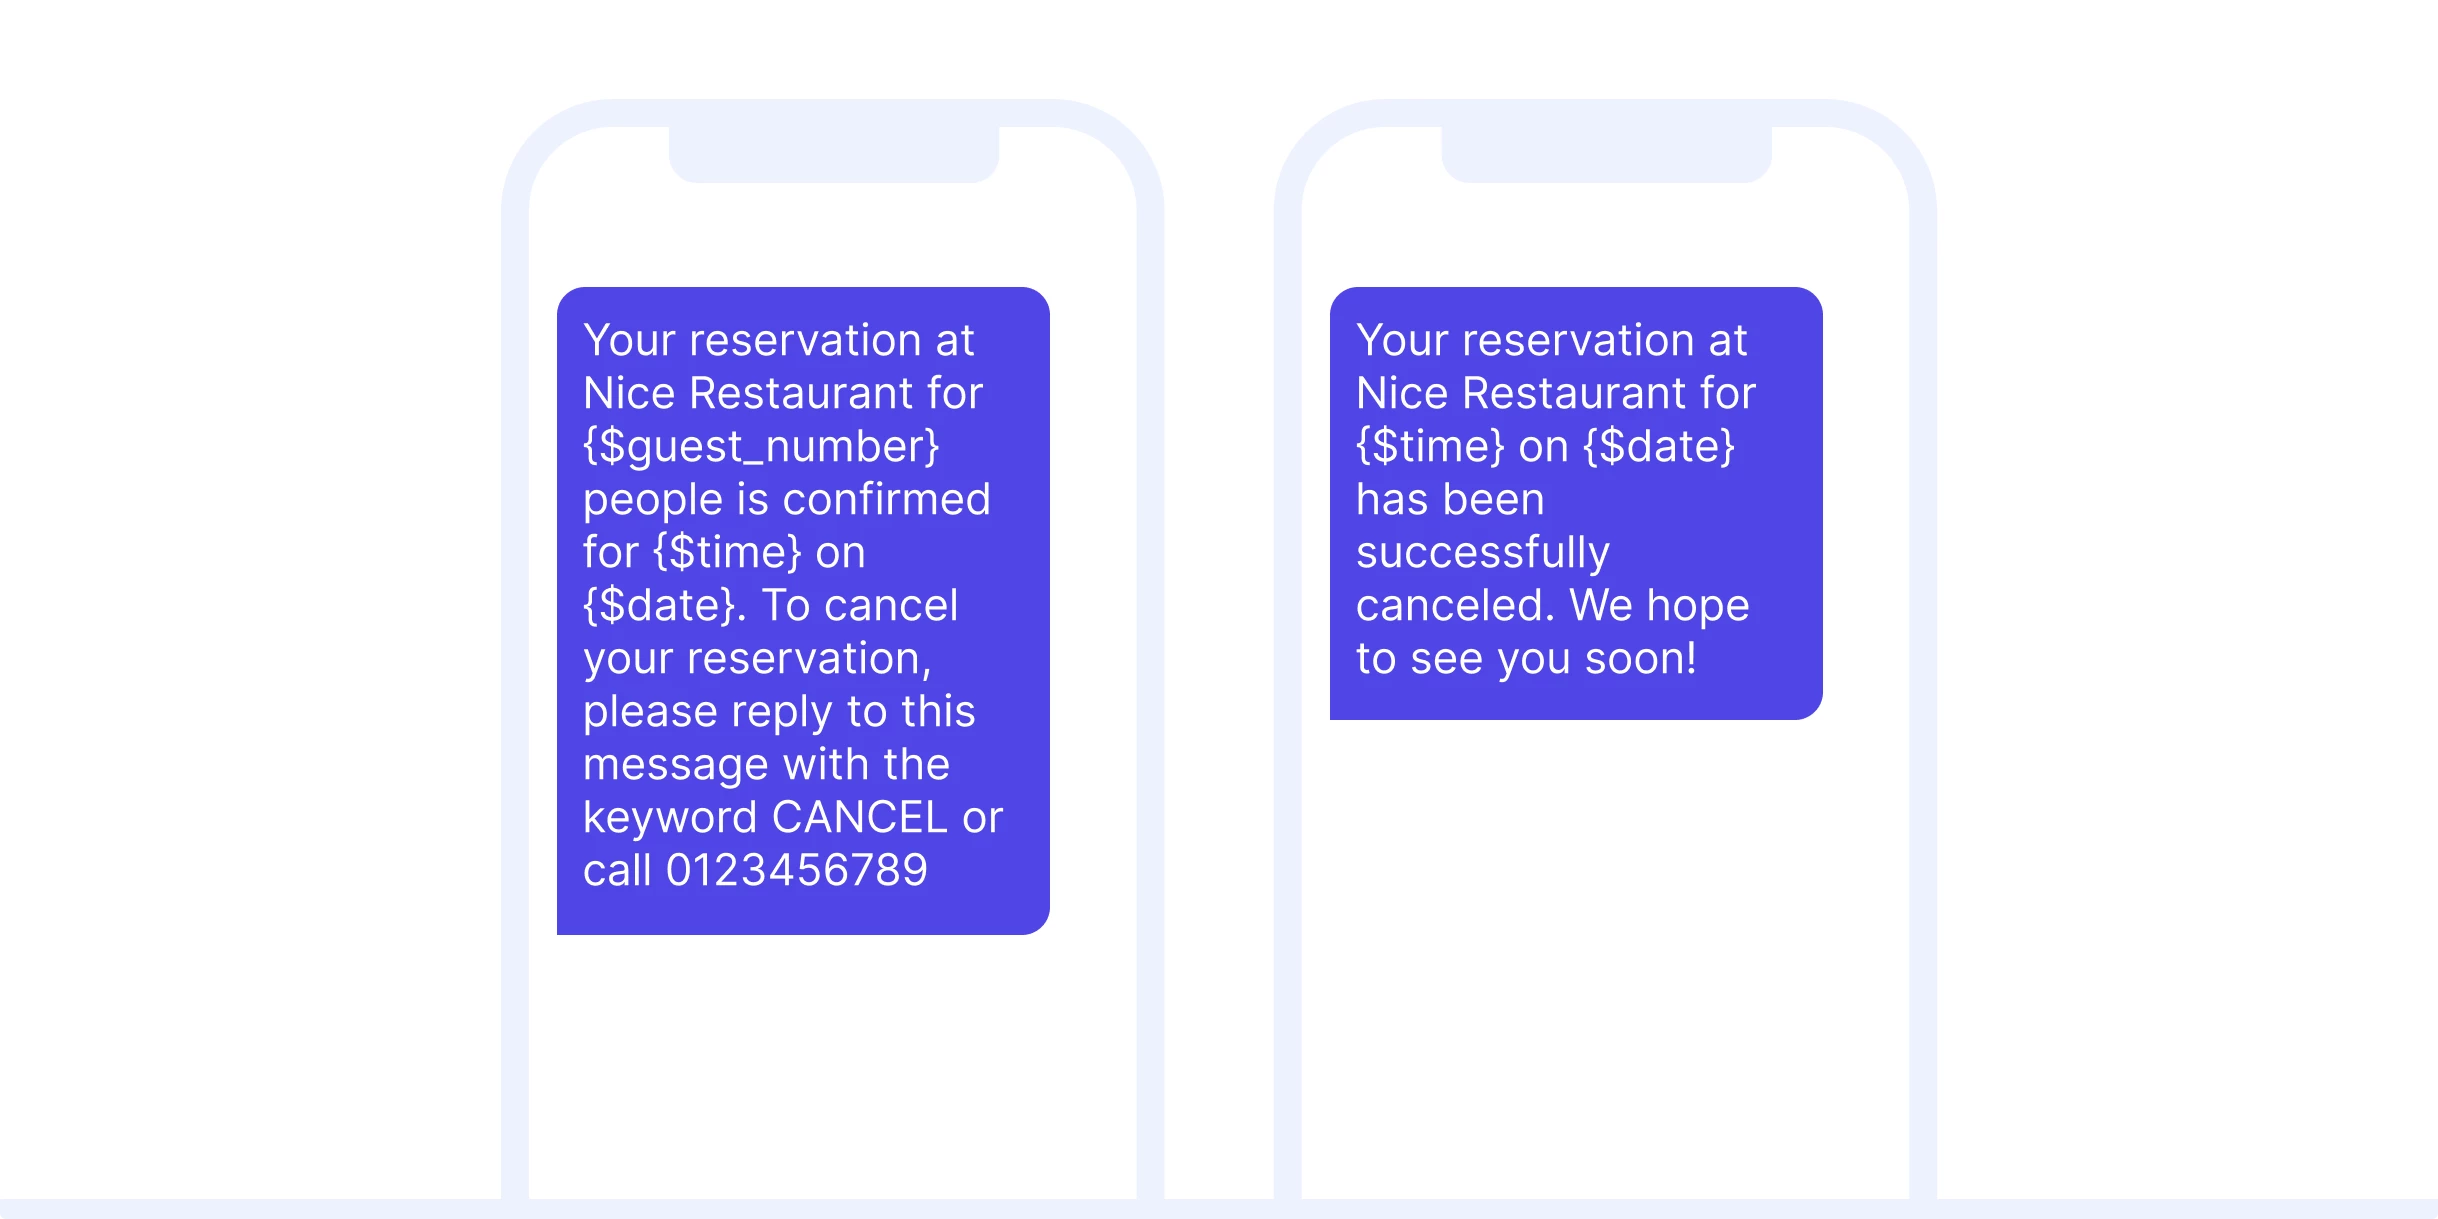 Transactional SMS examples for reservation confirmation and cancellation.